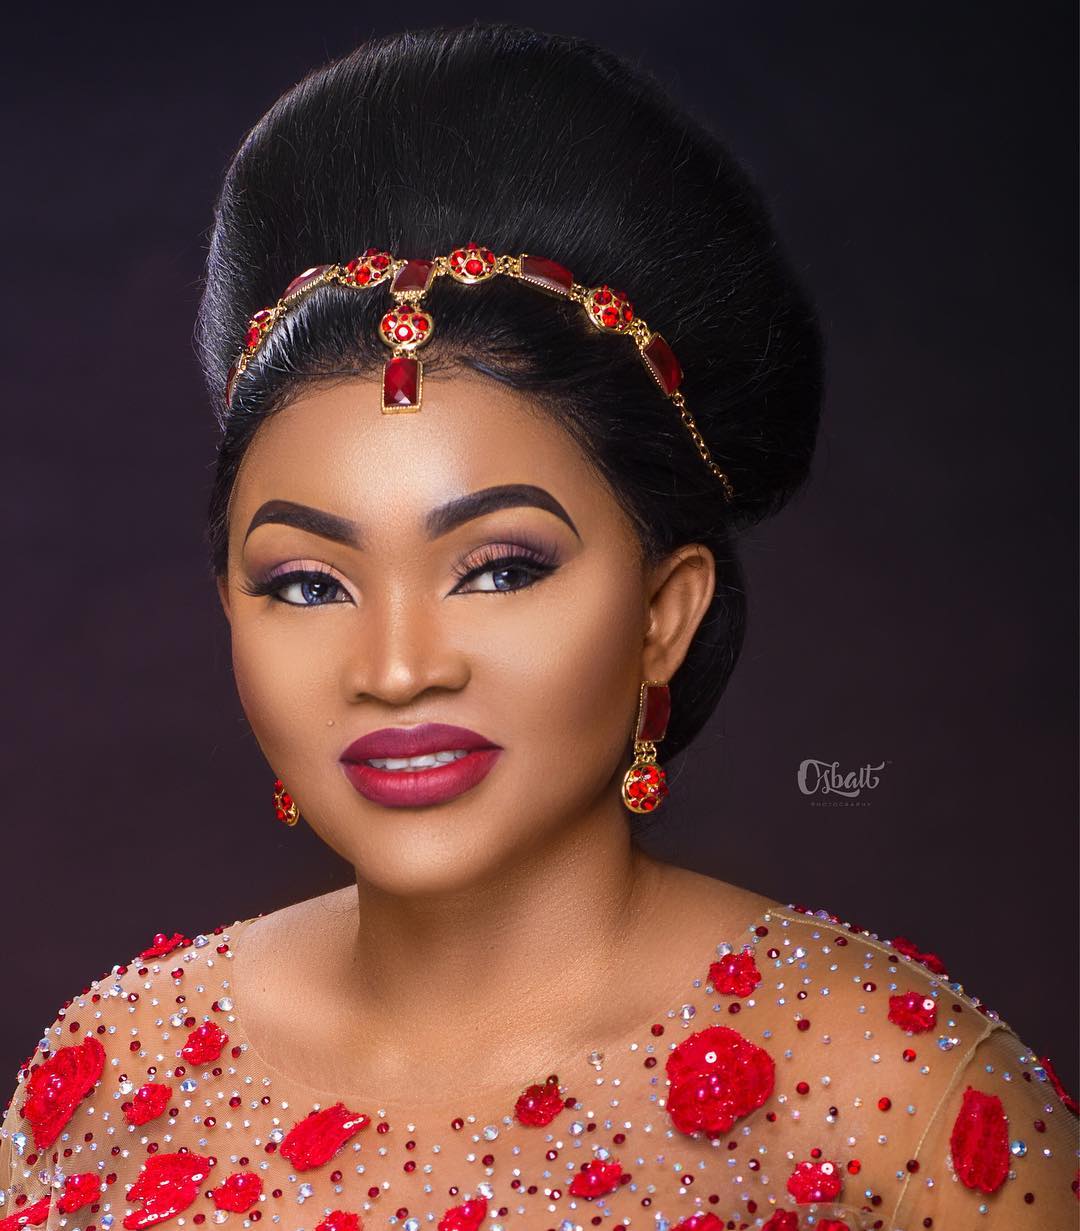 Mercy Aigbe is a Queen at 40 - BellaNaija